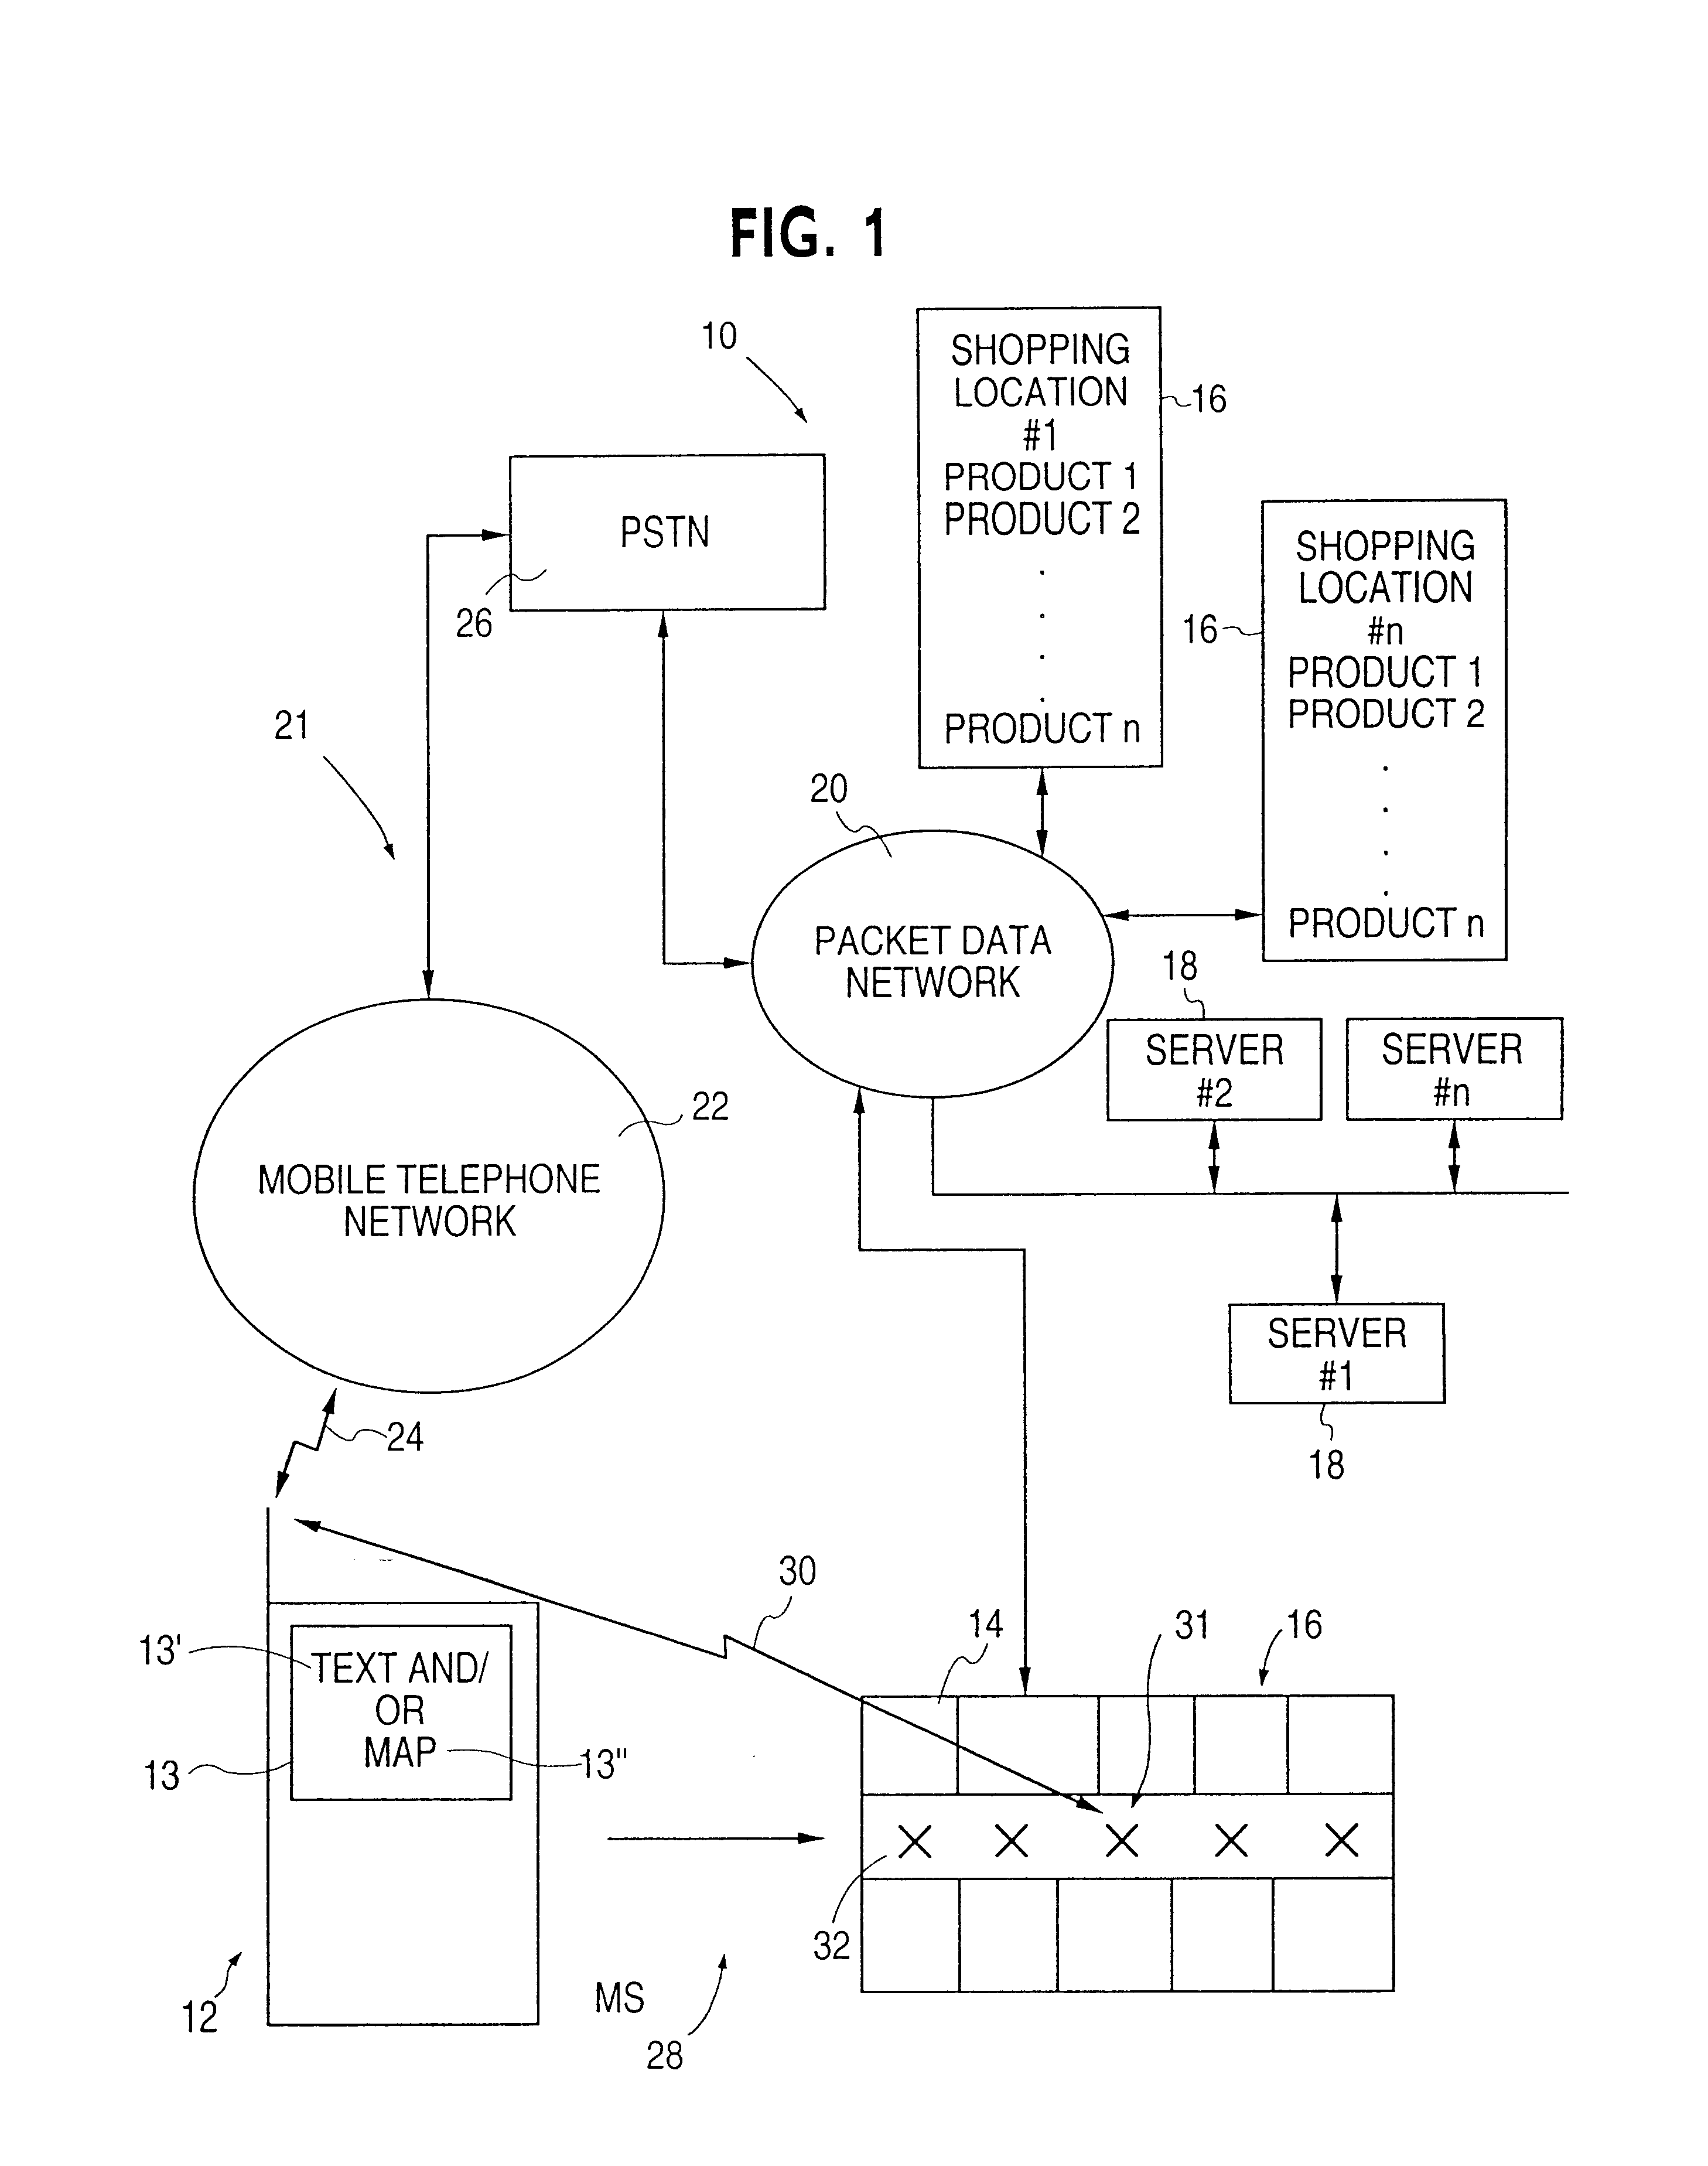 Method and system of shopping with a mobile device to purchase goods and/or services